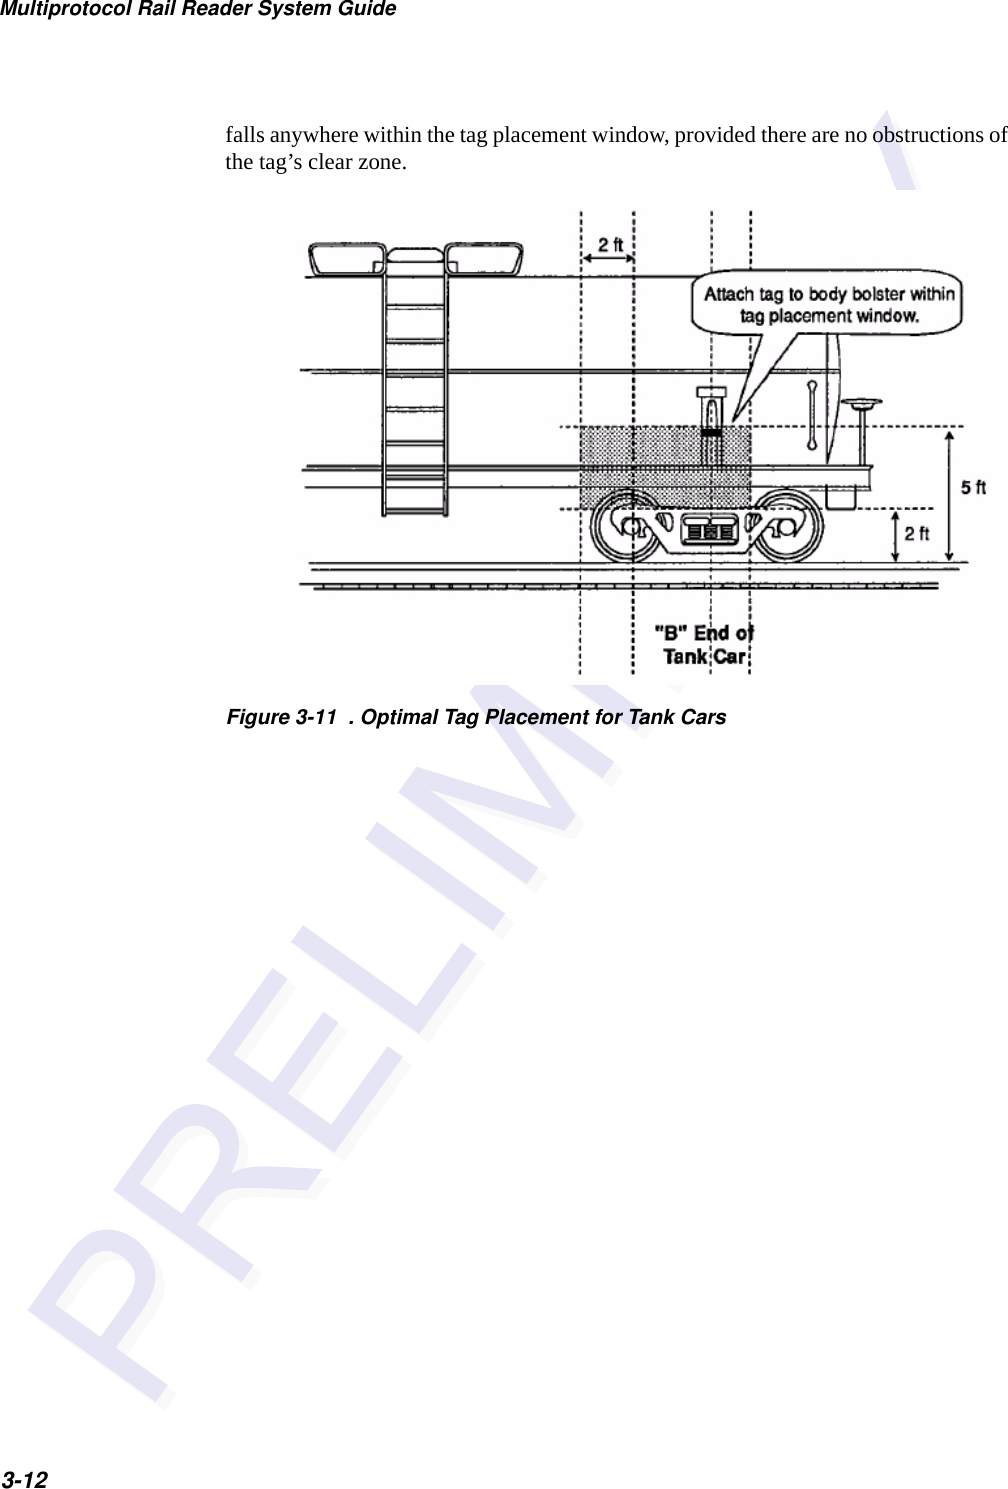 Multiprotocol Rail Reader System Guide3-12falls anywhere within the tag placement window, provided there are no obstructions of the tag’s clear zone.Figure 3-11  . Optimal Tag Placement for Tank Cars